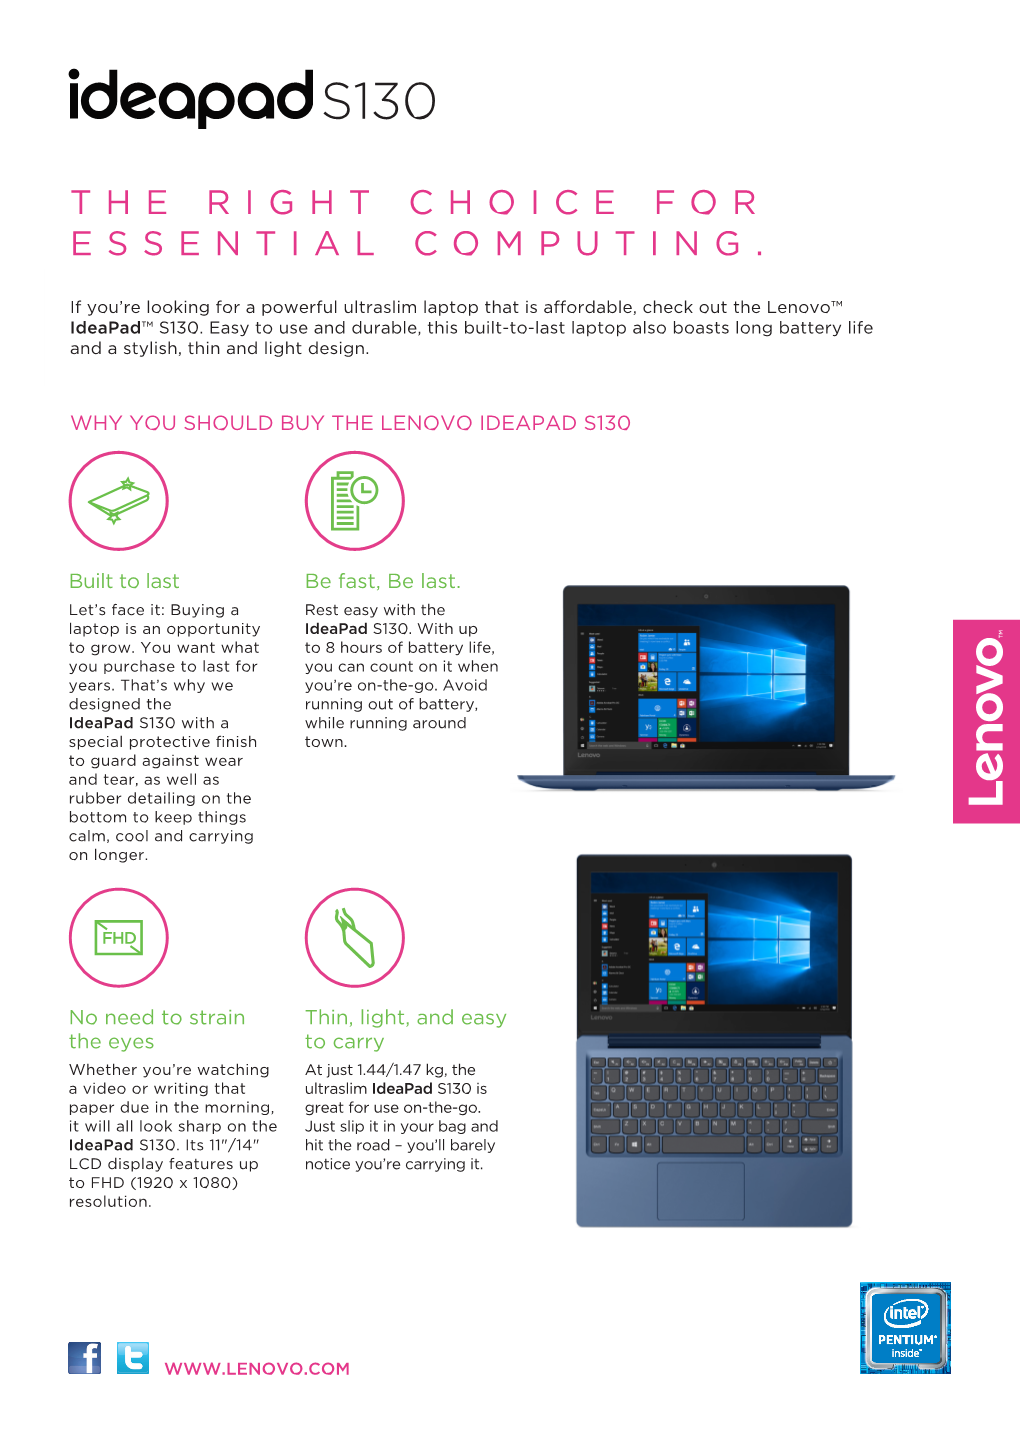 The Right Choice for Essential Computing